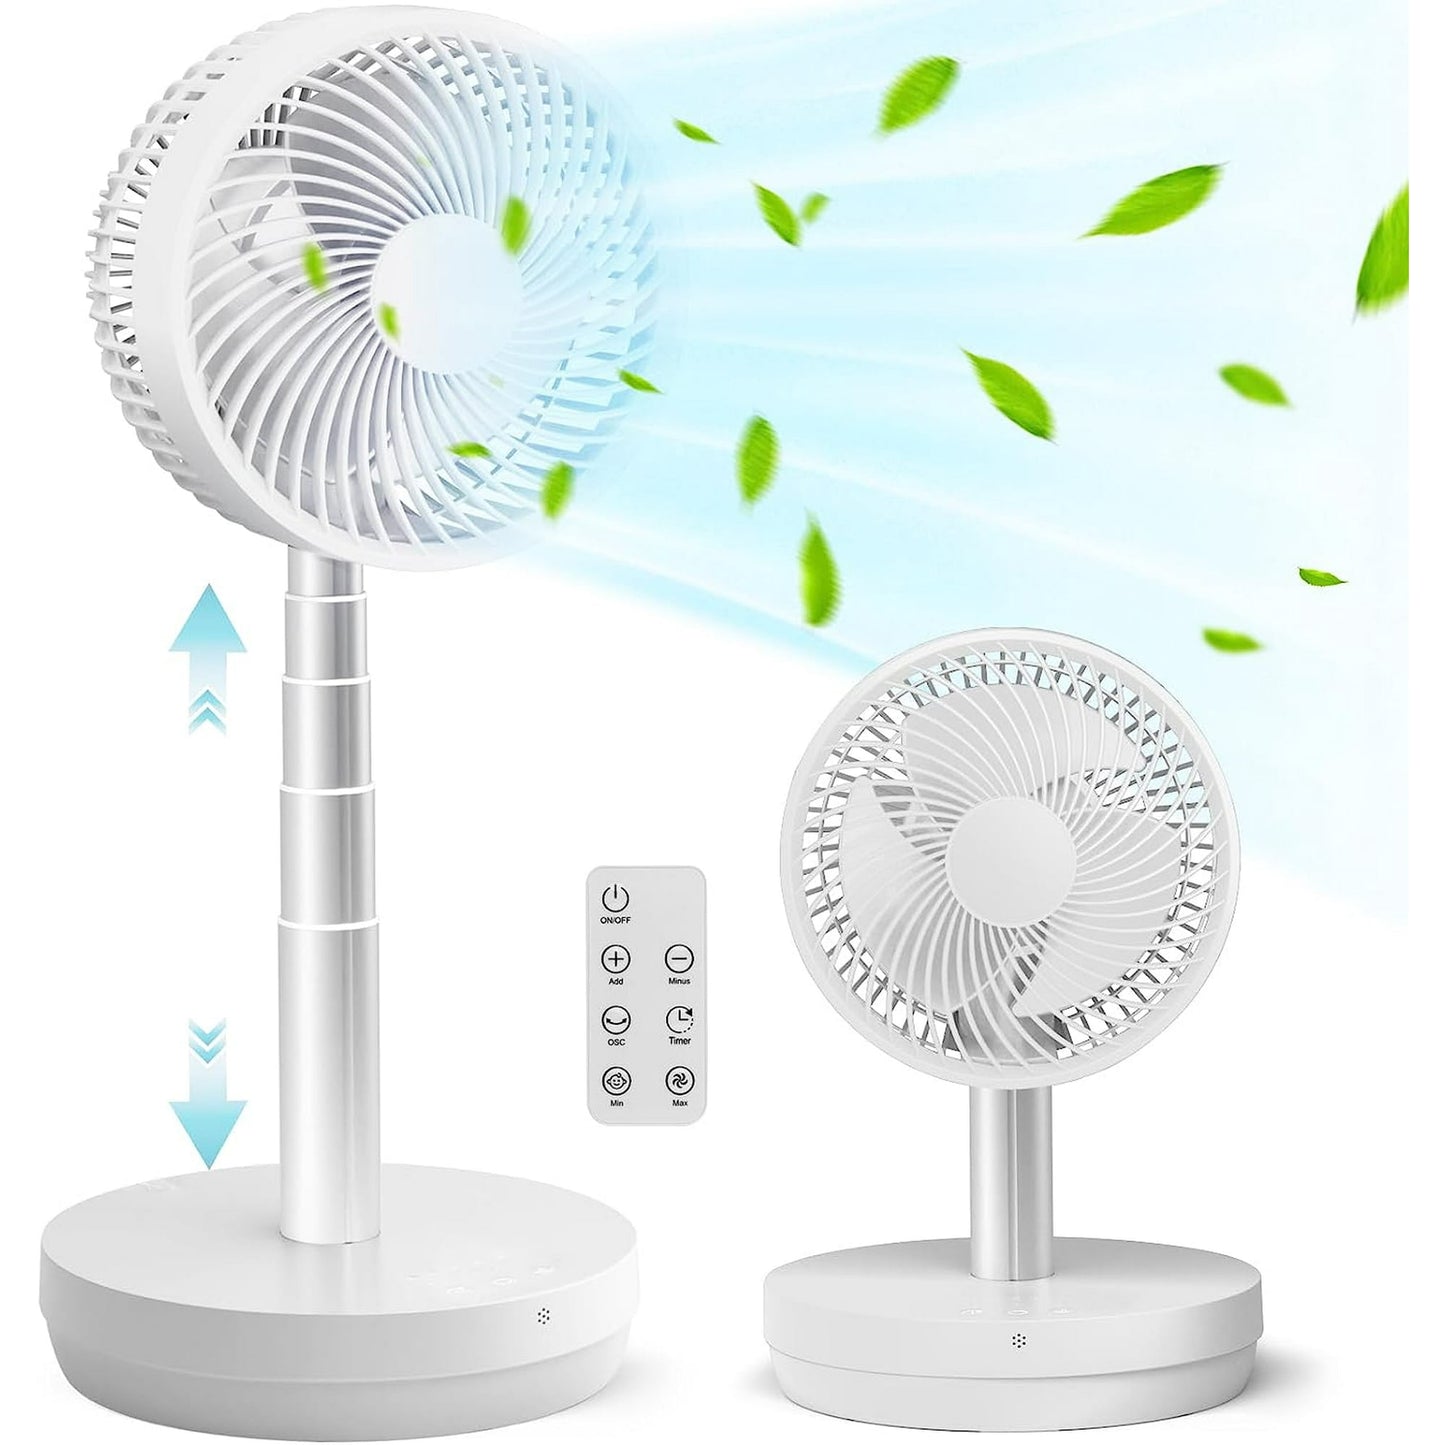 KISSAIR Portable Foldable Pedestal Fan- Rechargeable Battery Folding Standing Table Fan with 10 Speeds with Remote Control for Home Bedroom Office, White